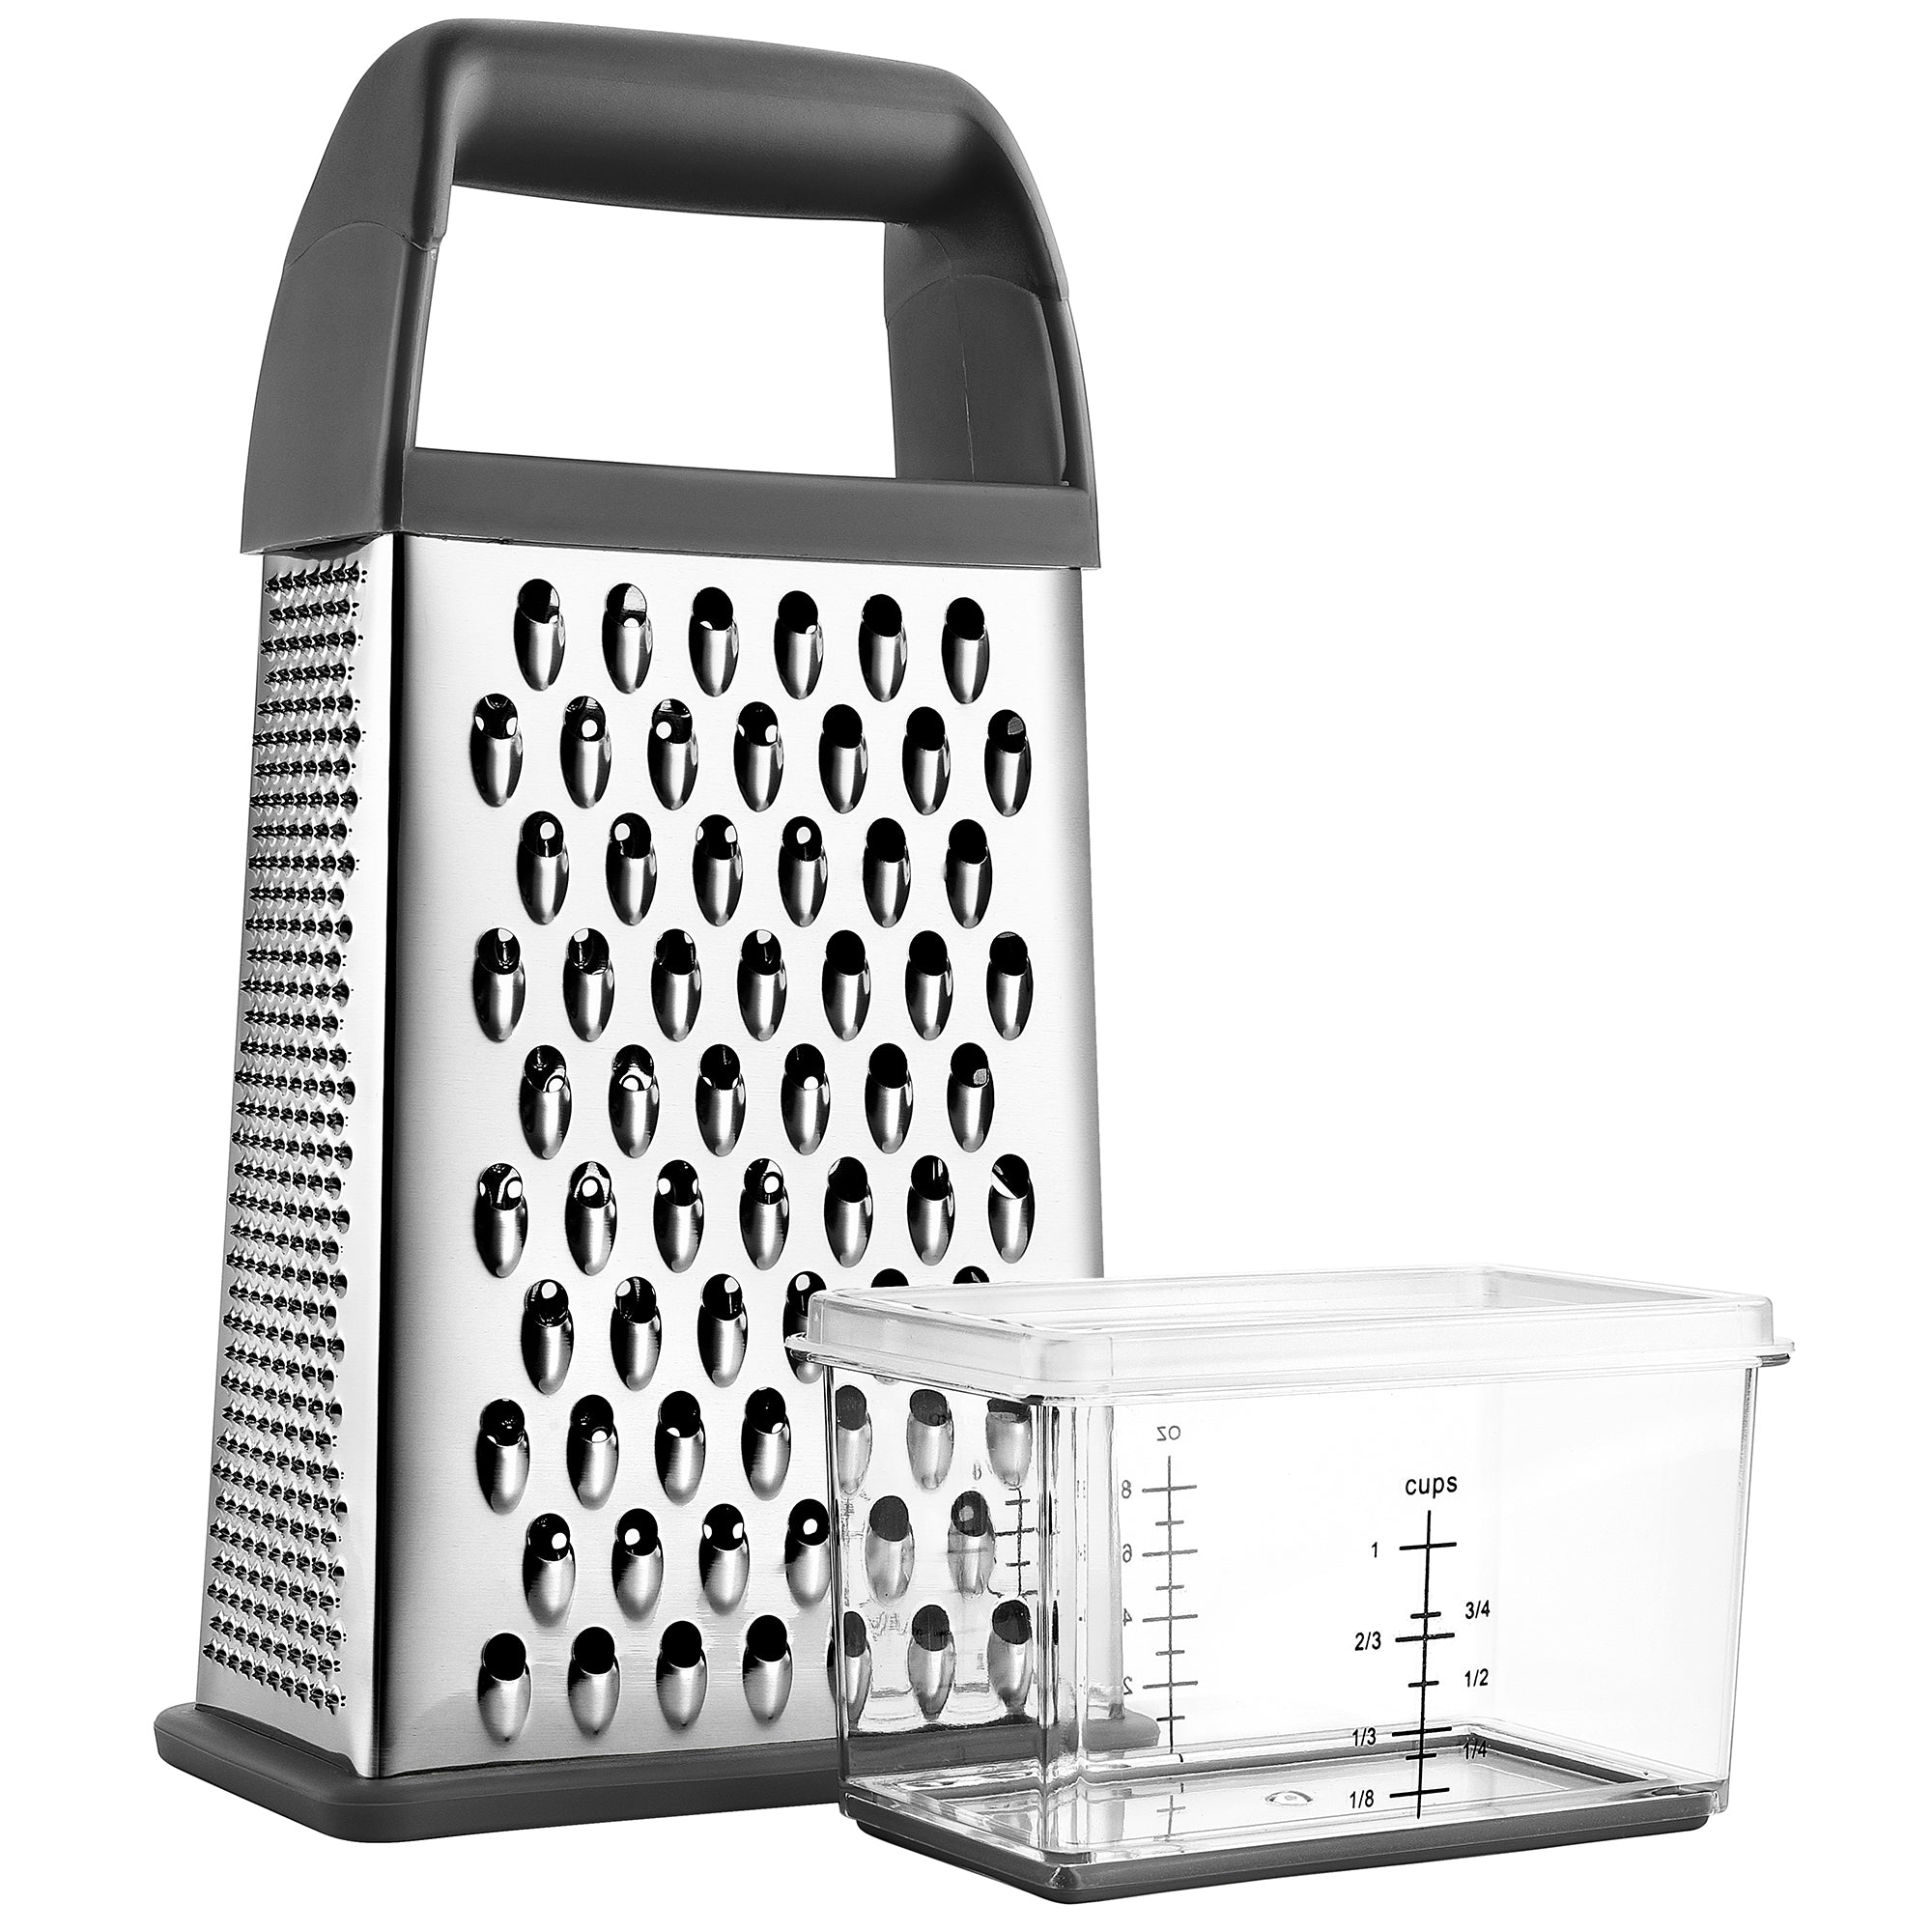 Cuisinox Stainless Steel Cheese Grater with Soft Touch Handle